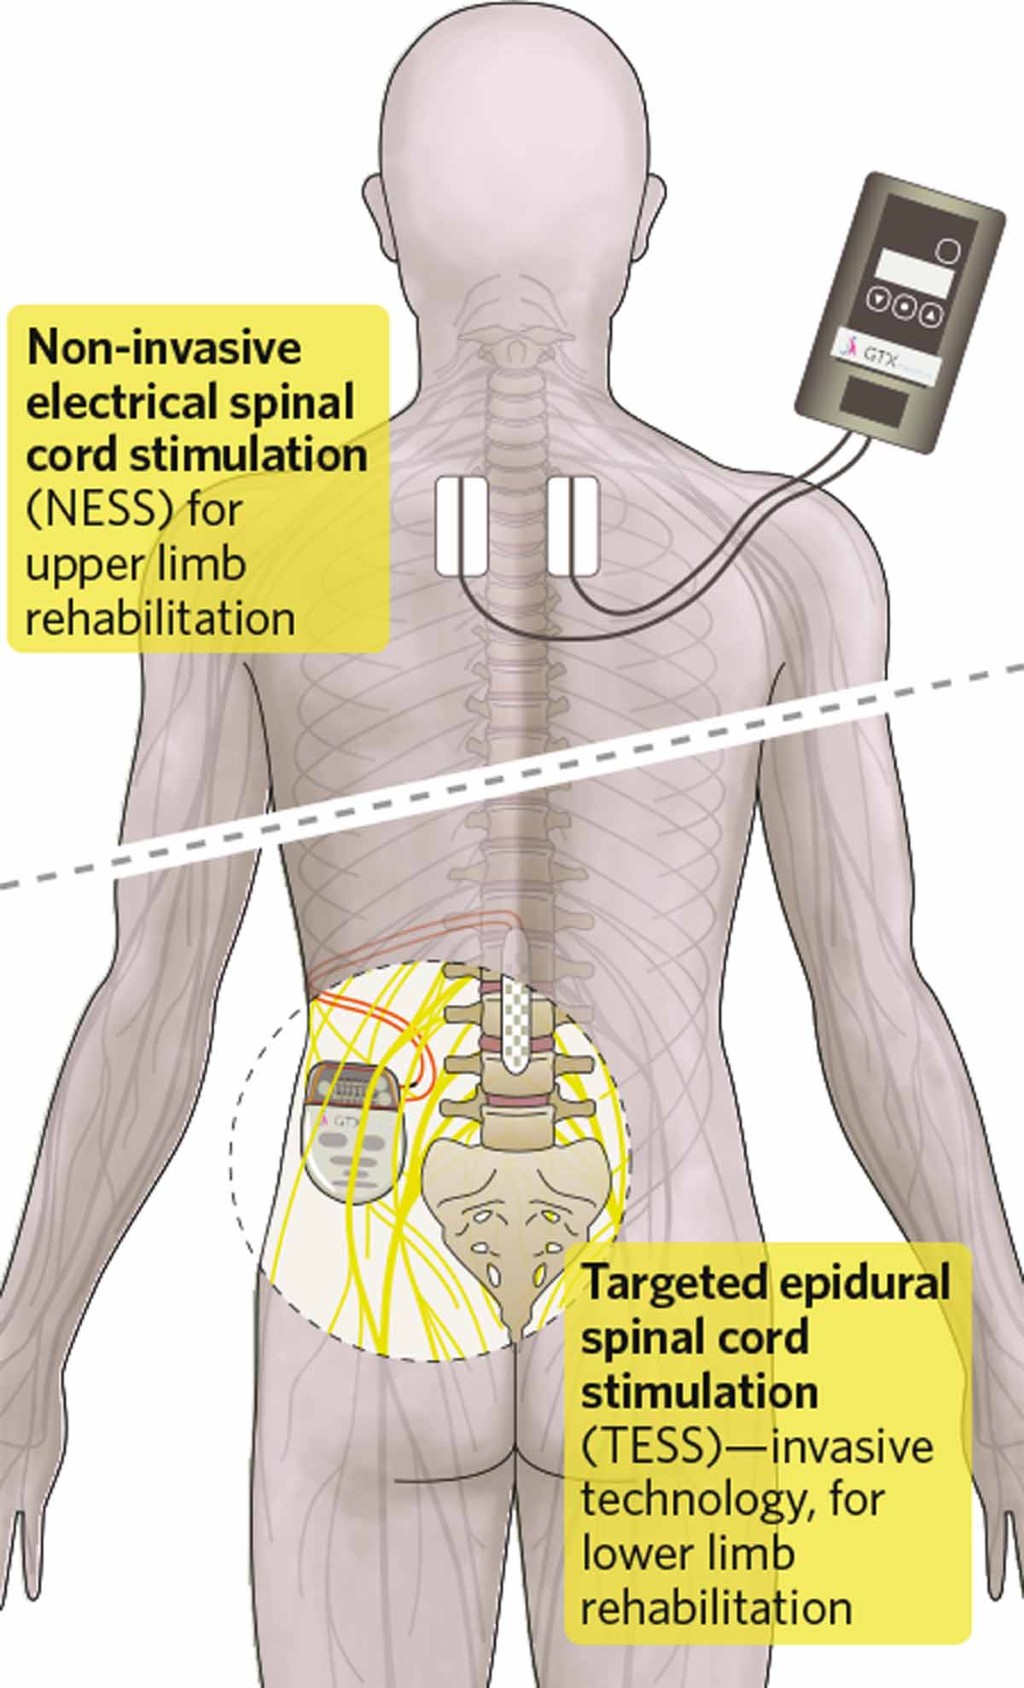 What Is Spinal Cord Stimulation Treatment